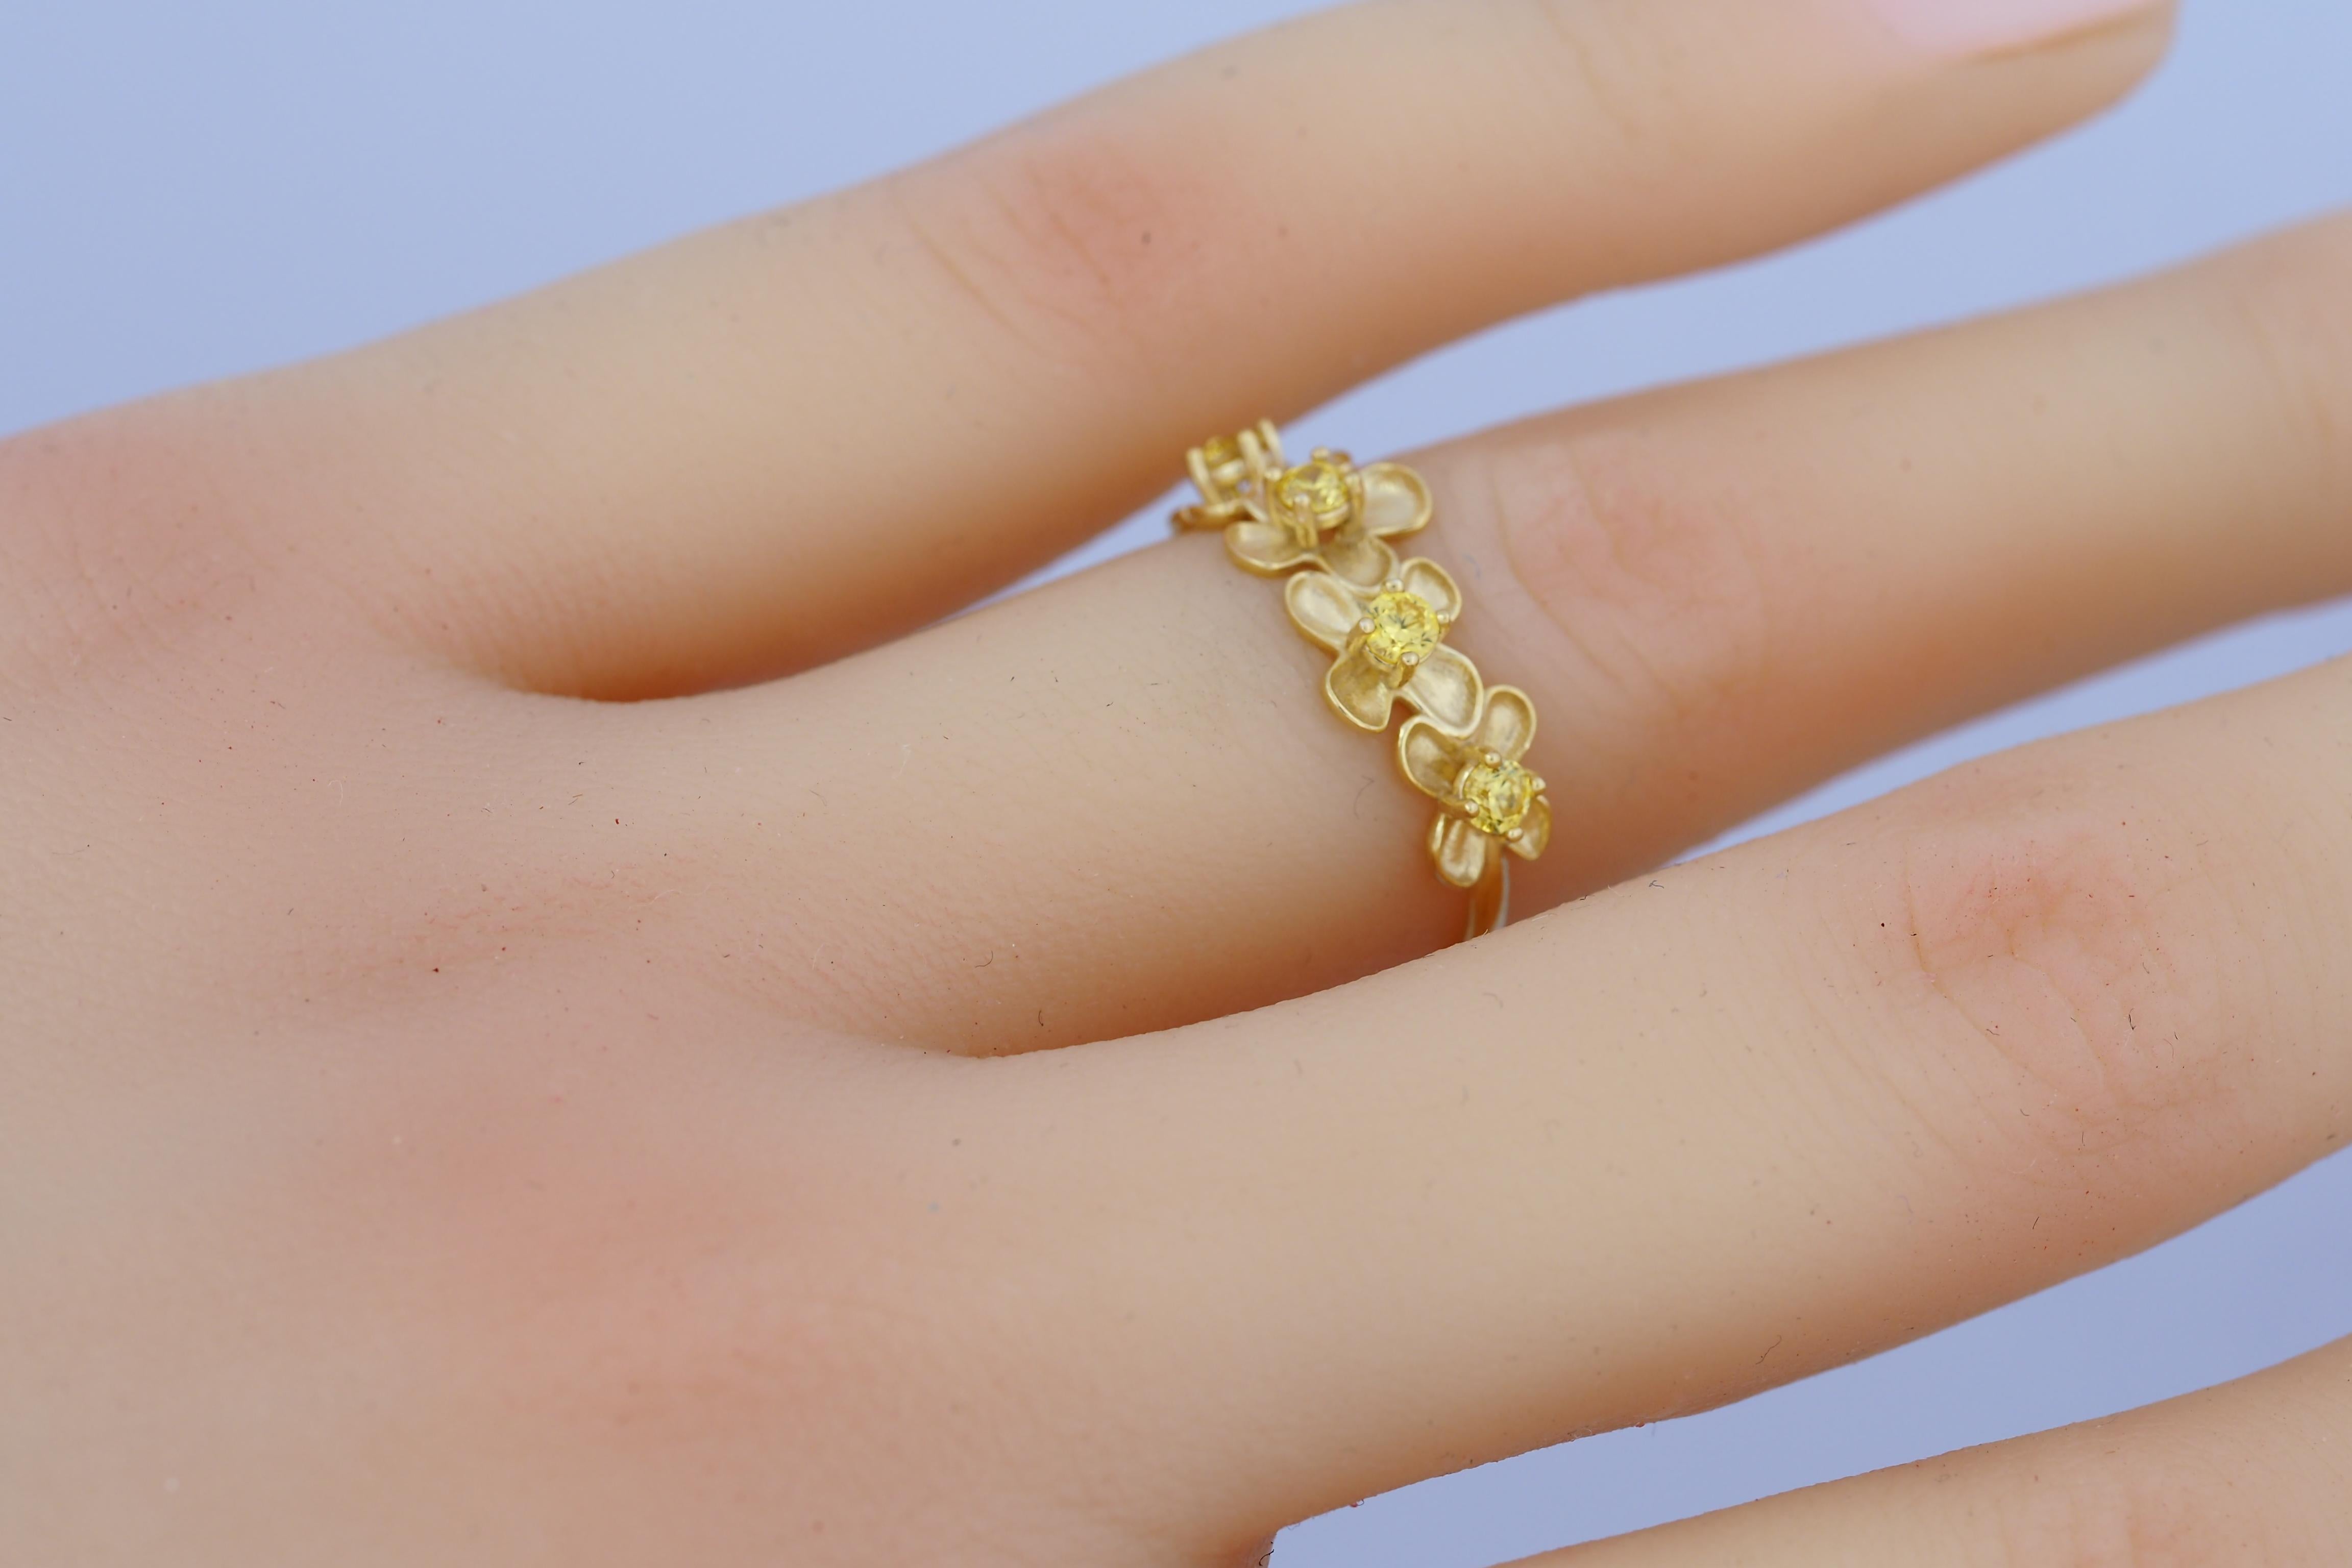 Flower 14k gold ring.
Lab yellow sapphires 14k gold ring. Daisy flower gold ring. Flower bouquet ring. Yellow gemstone ring.

Metal: 14k solid gold
Weight: 2 gr depends from size

Gemstones
Set with lab sapphires
Color -yellow, 
Cut: round

In our